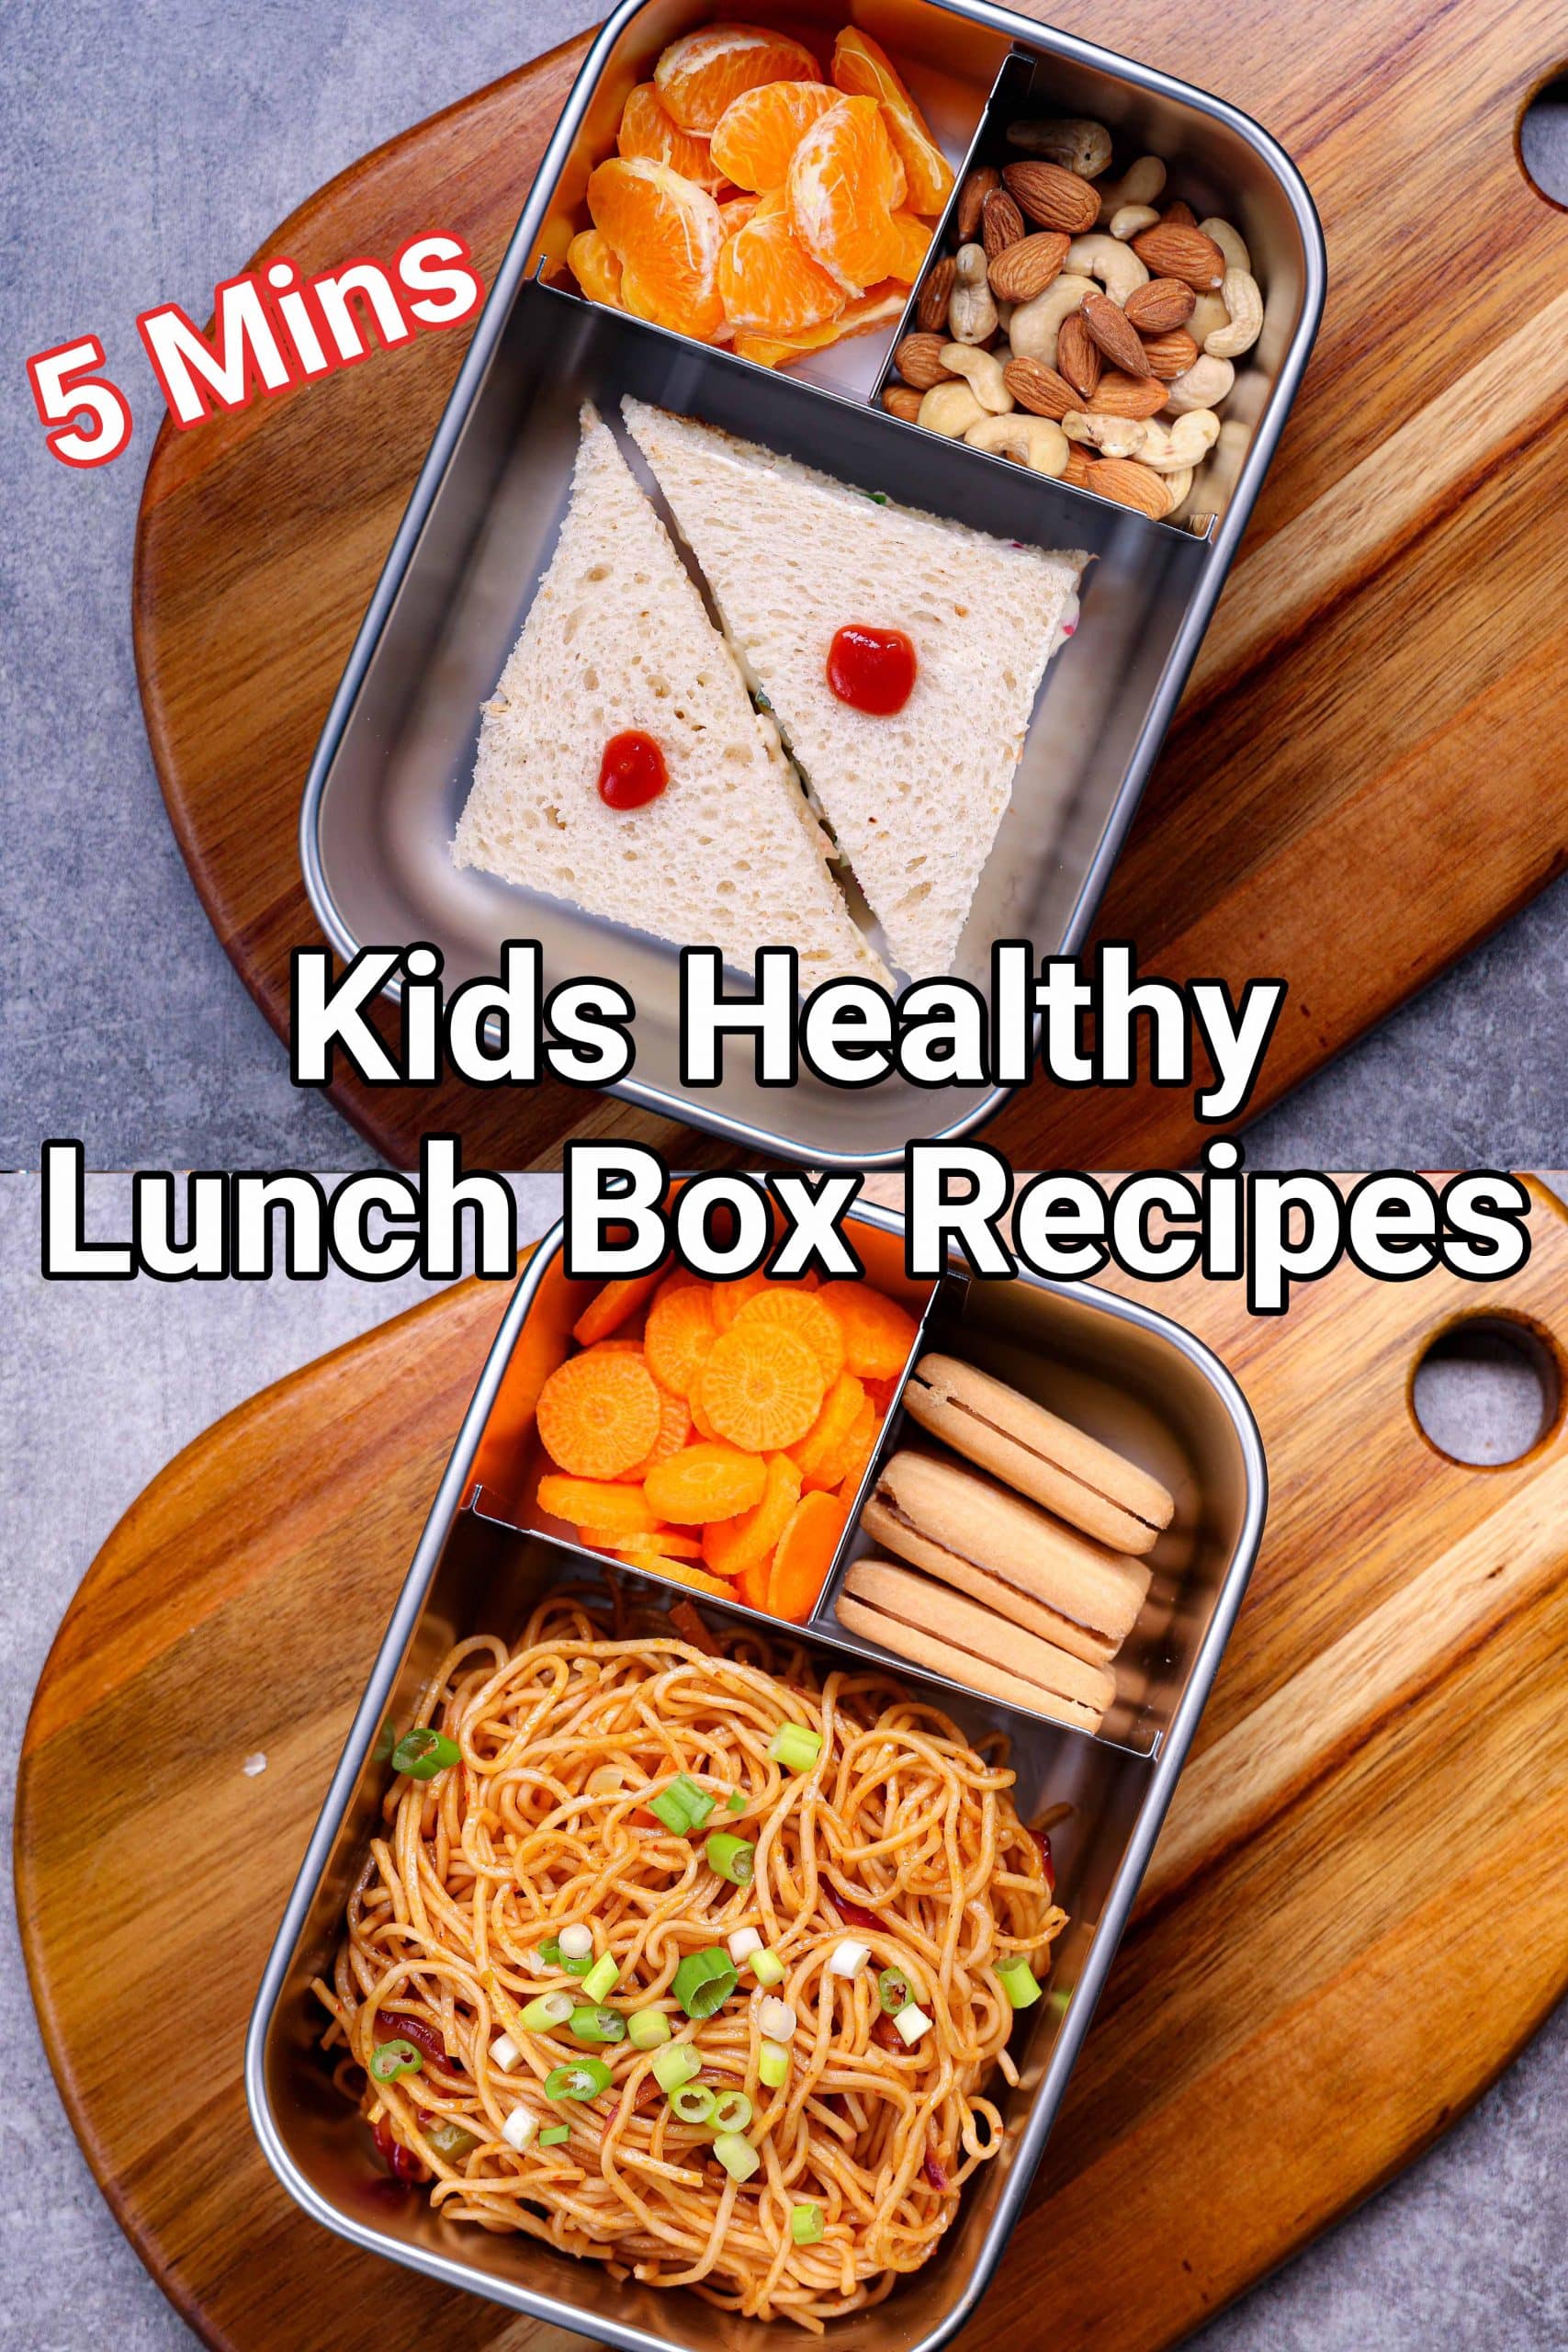 6 Lunch Box Ideas for Kids  6 Healthy Lunch Box Recipes for 6